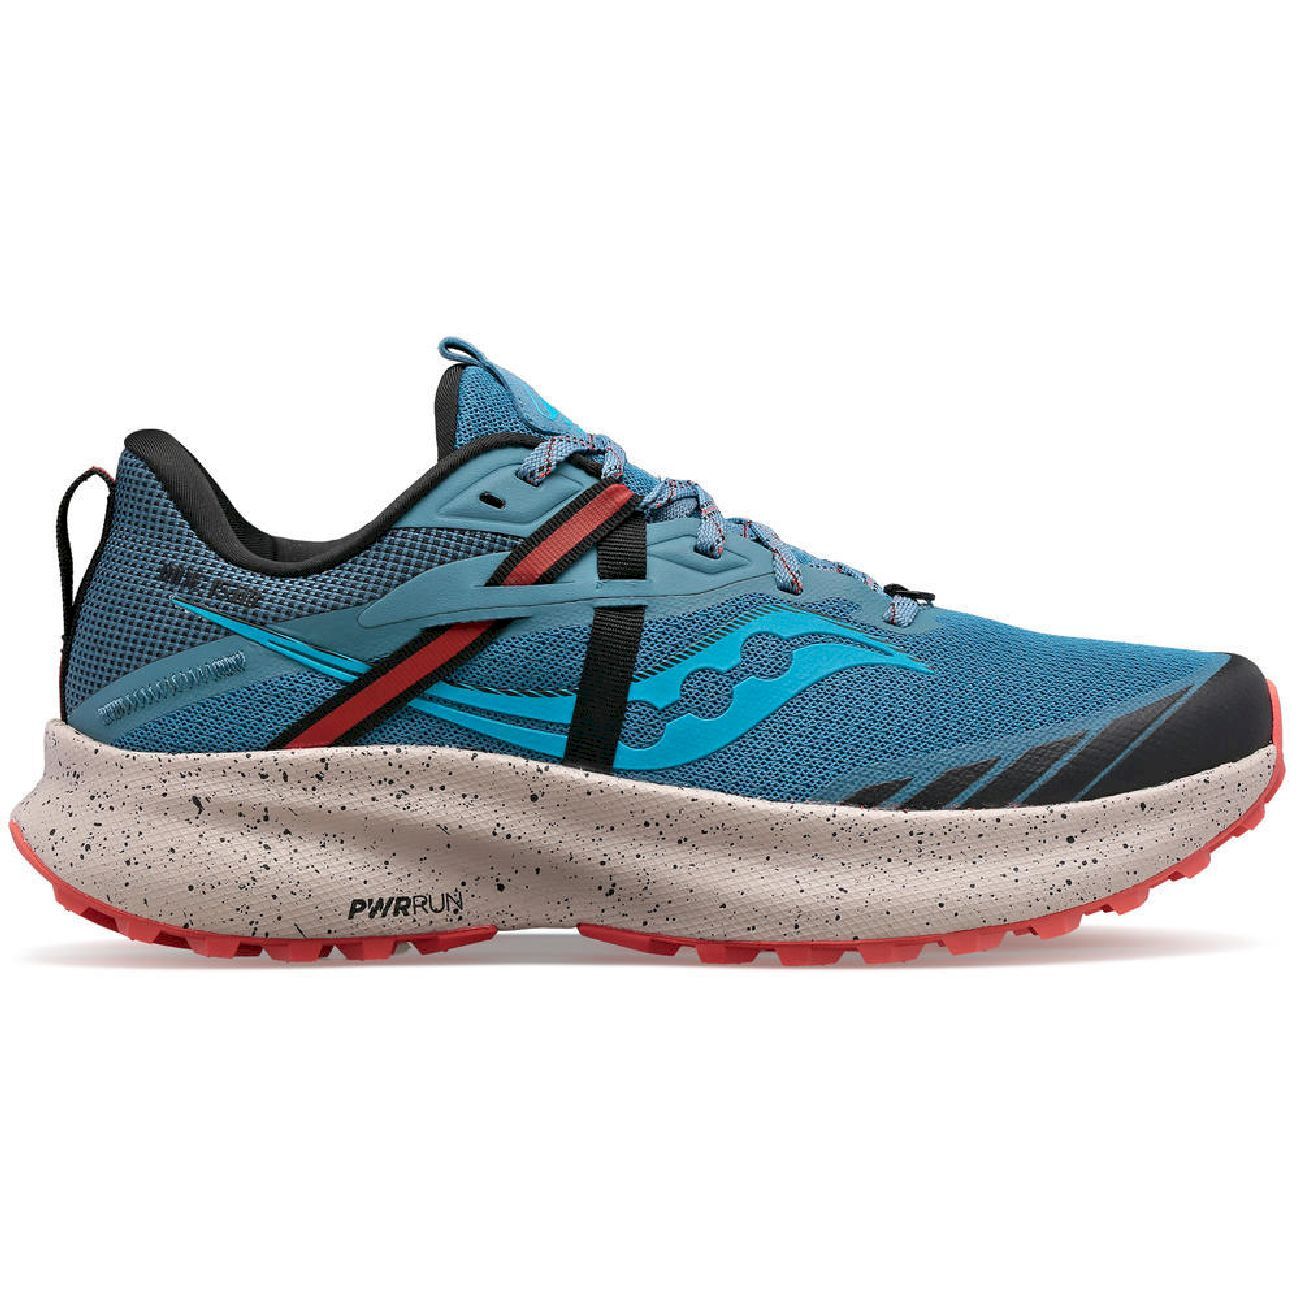 Saucony Ride 15 TR - Trail running shoes - Women's